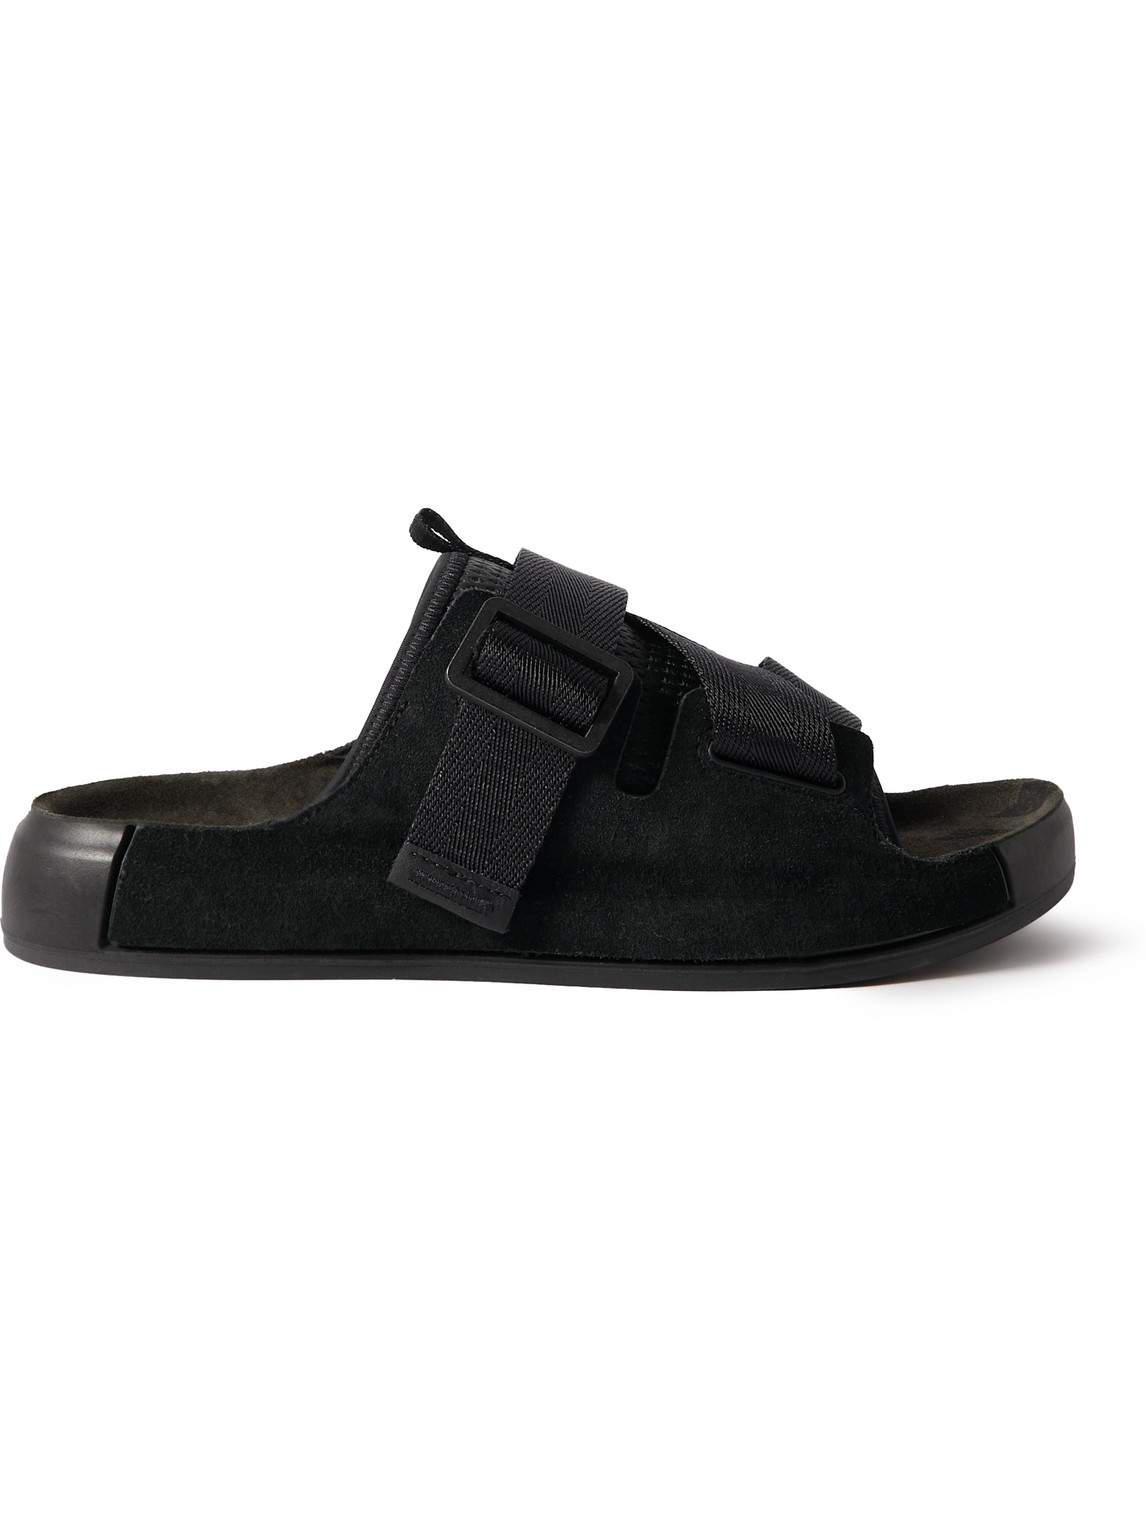 STONE ISLAND SHADOW PROJECT SUEDE AND MESH SANDALS